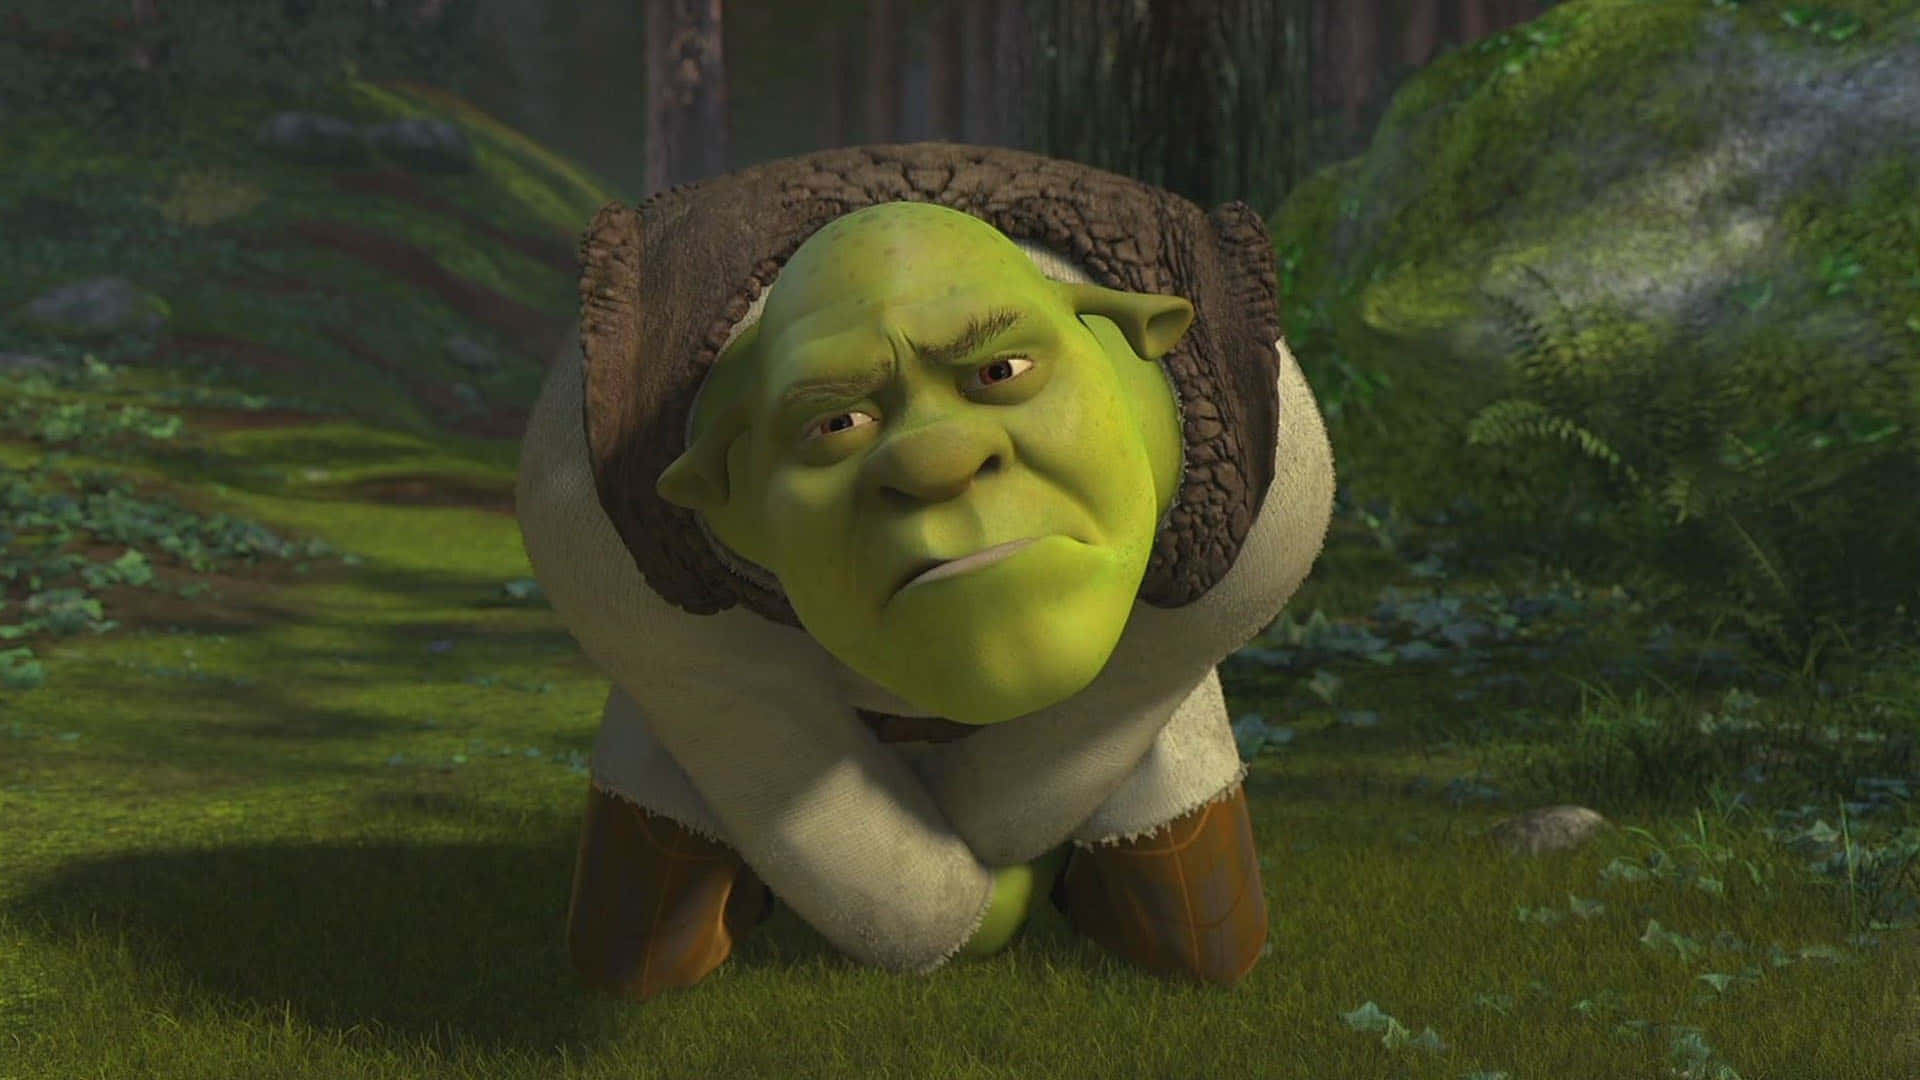 "Once upon a time, in a far-off swamp, there lived an ornery ogre named Shrek"